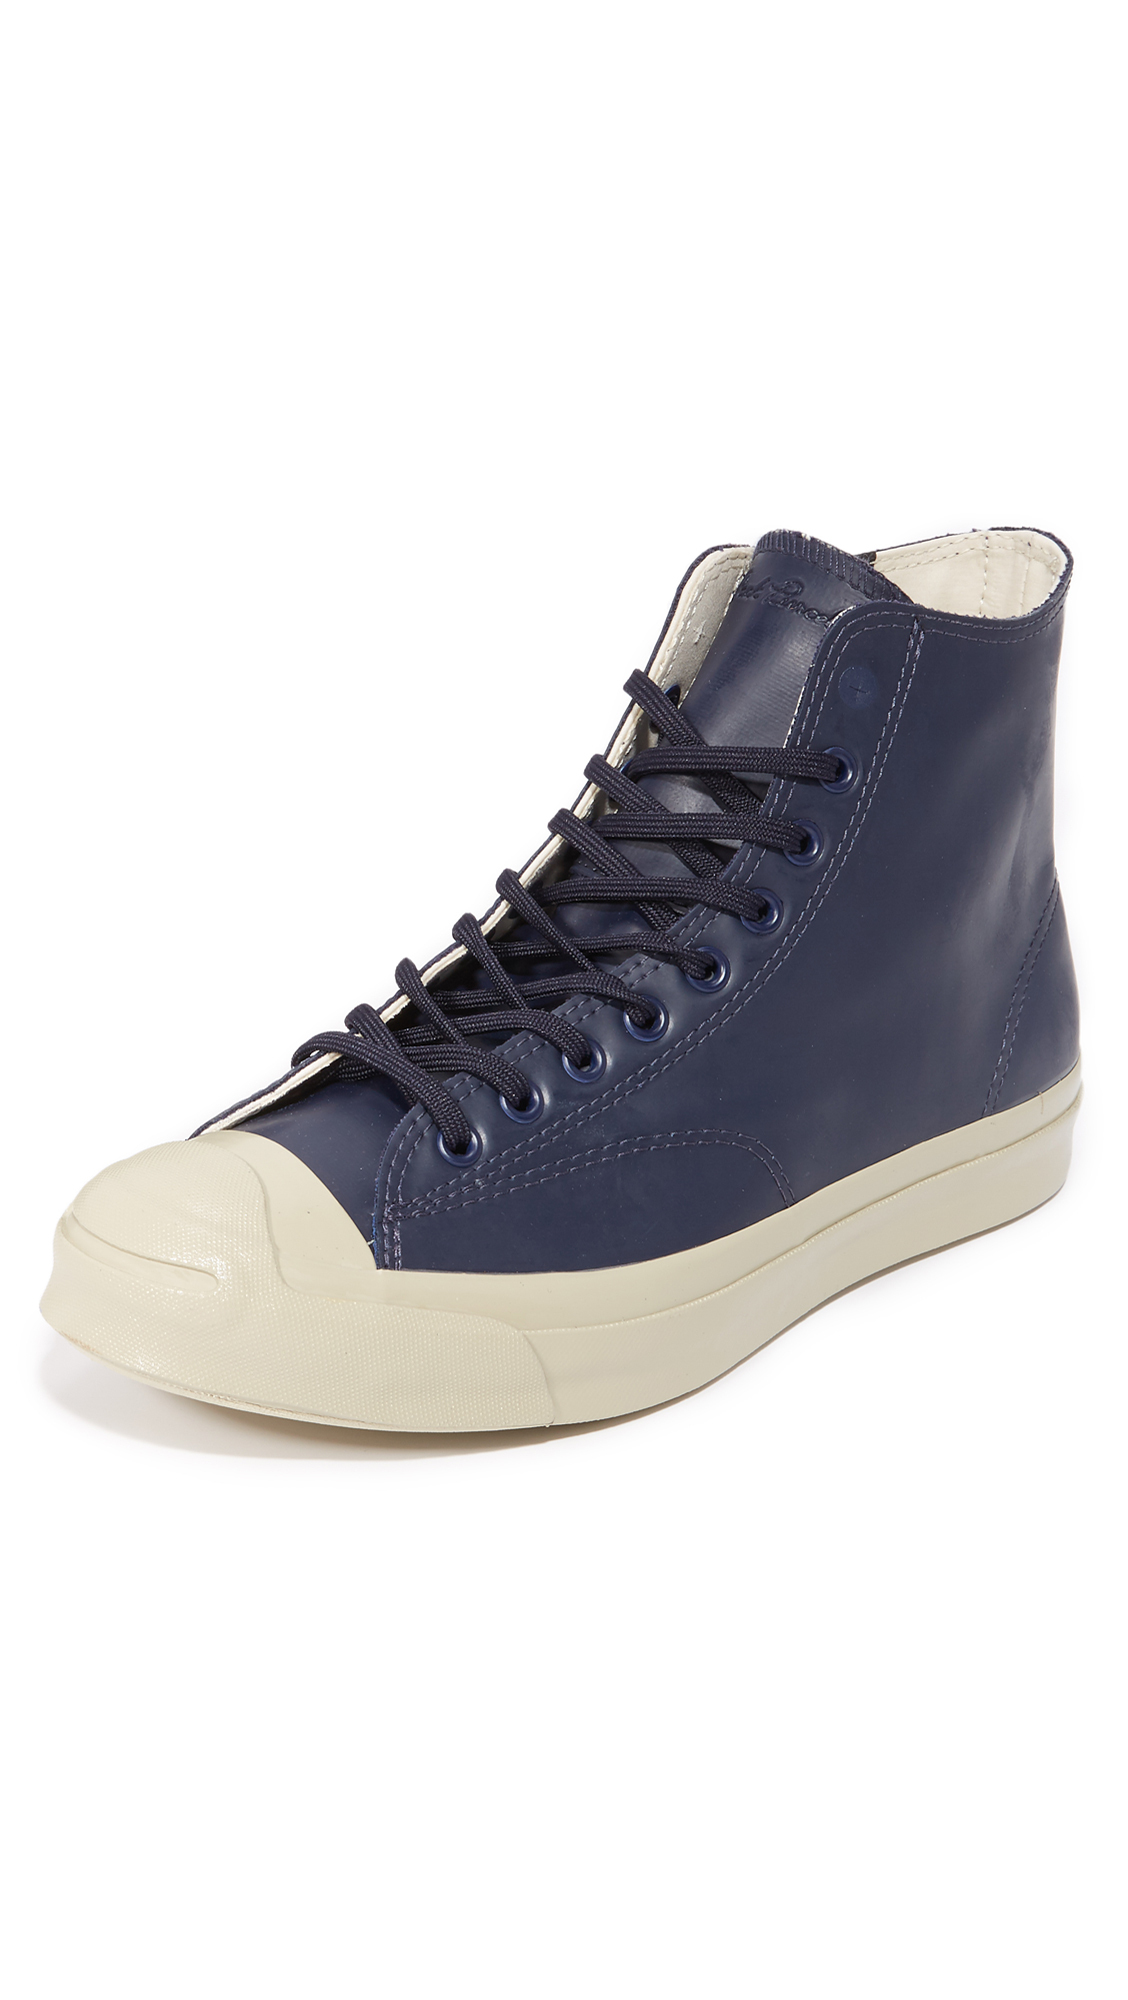 converse jack purcell signature rubber high top